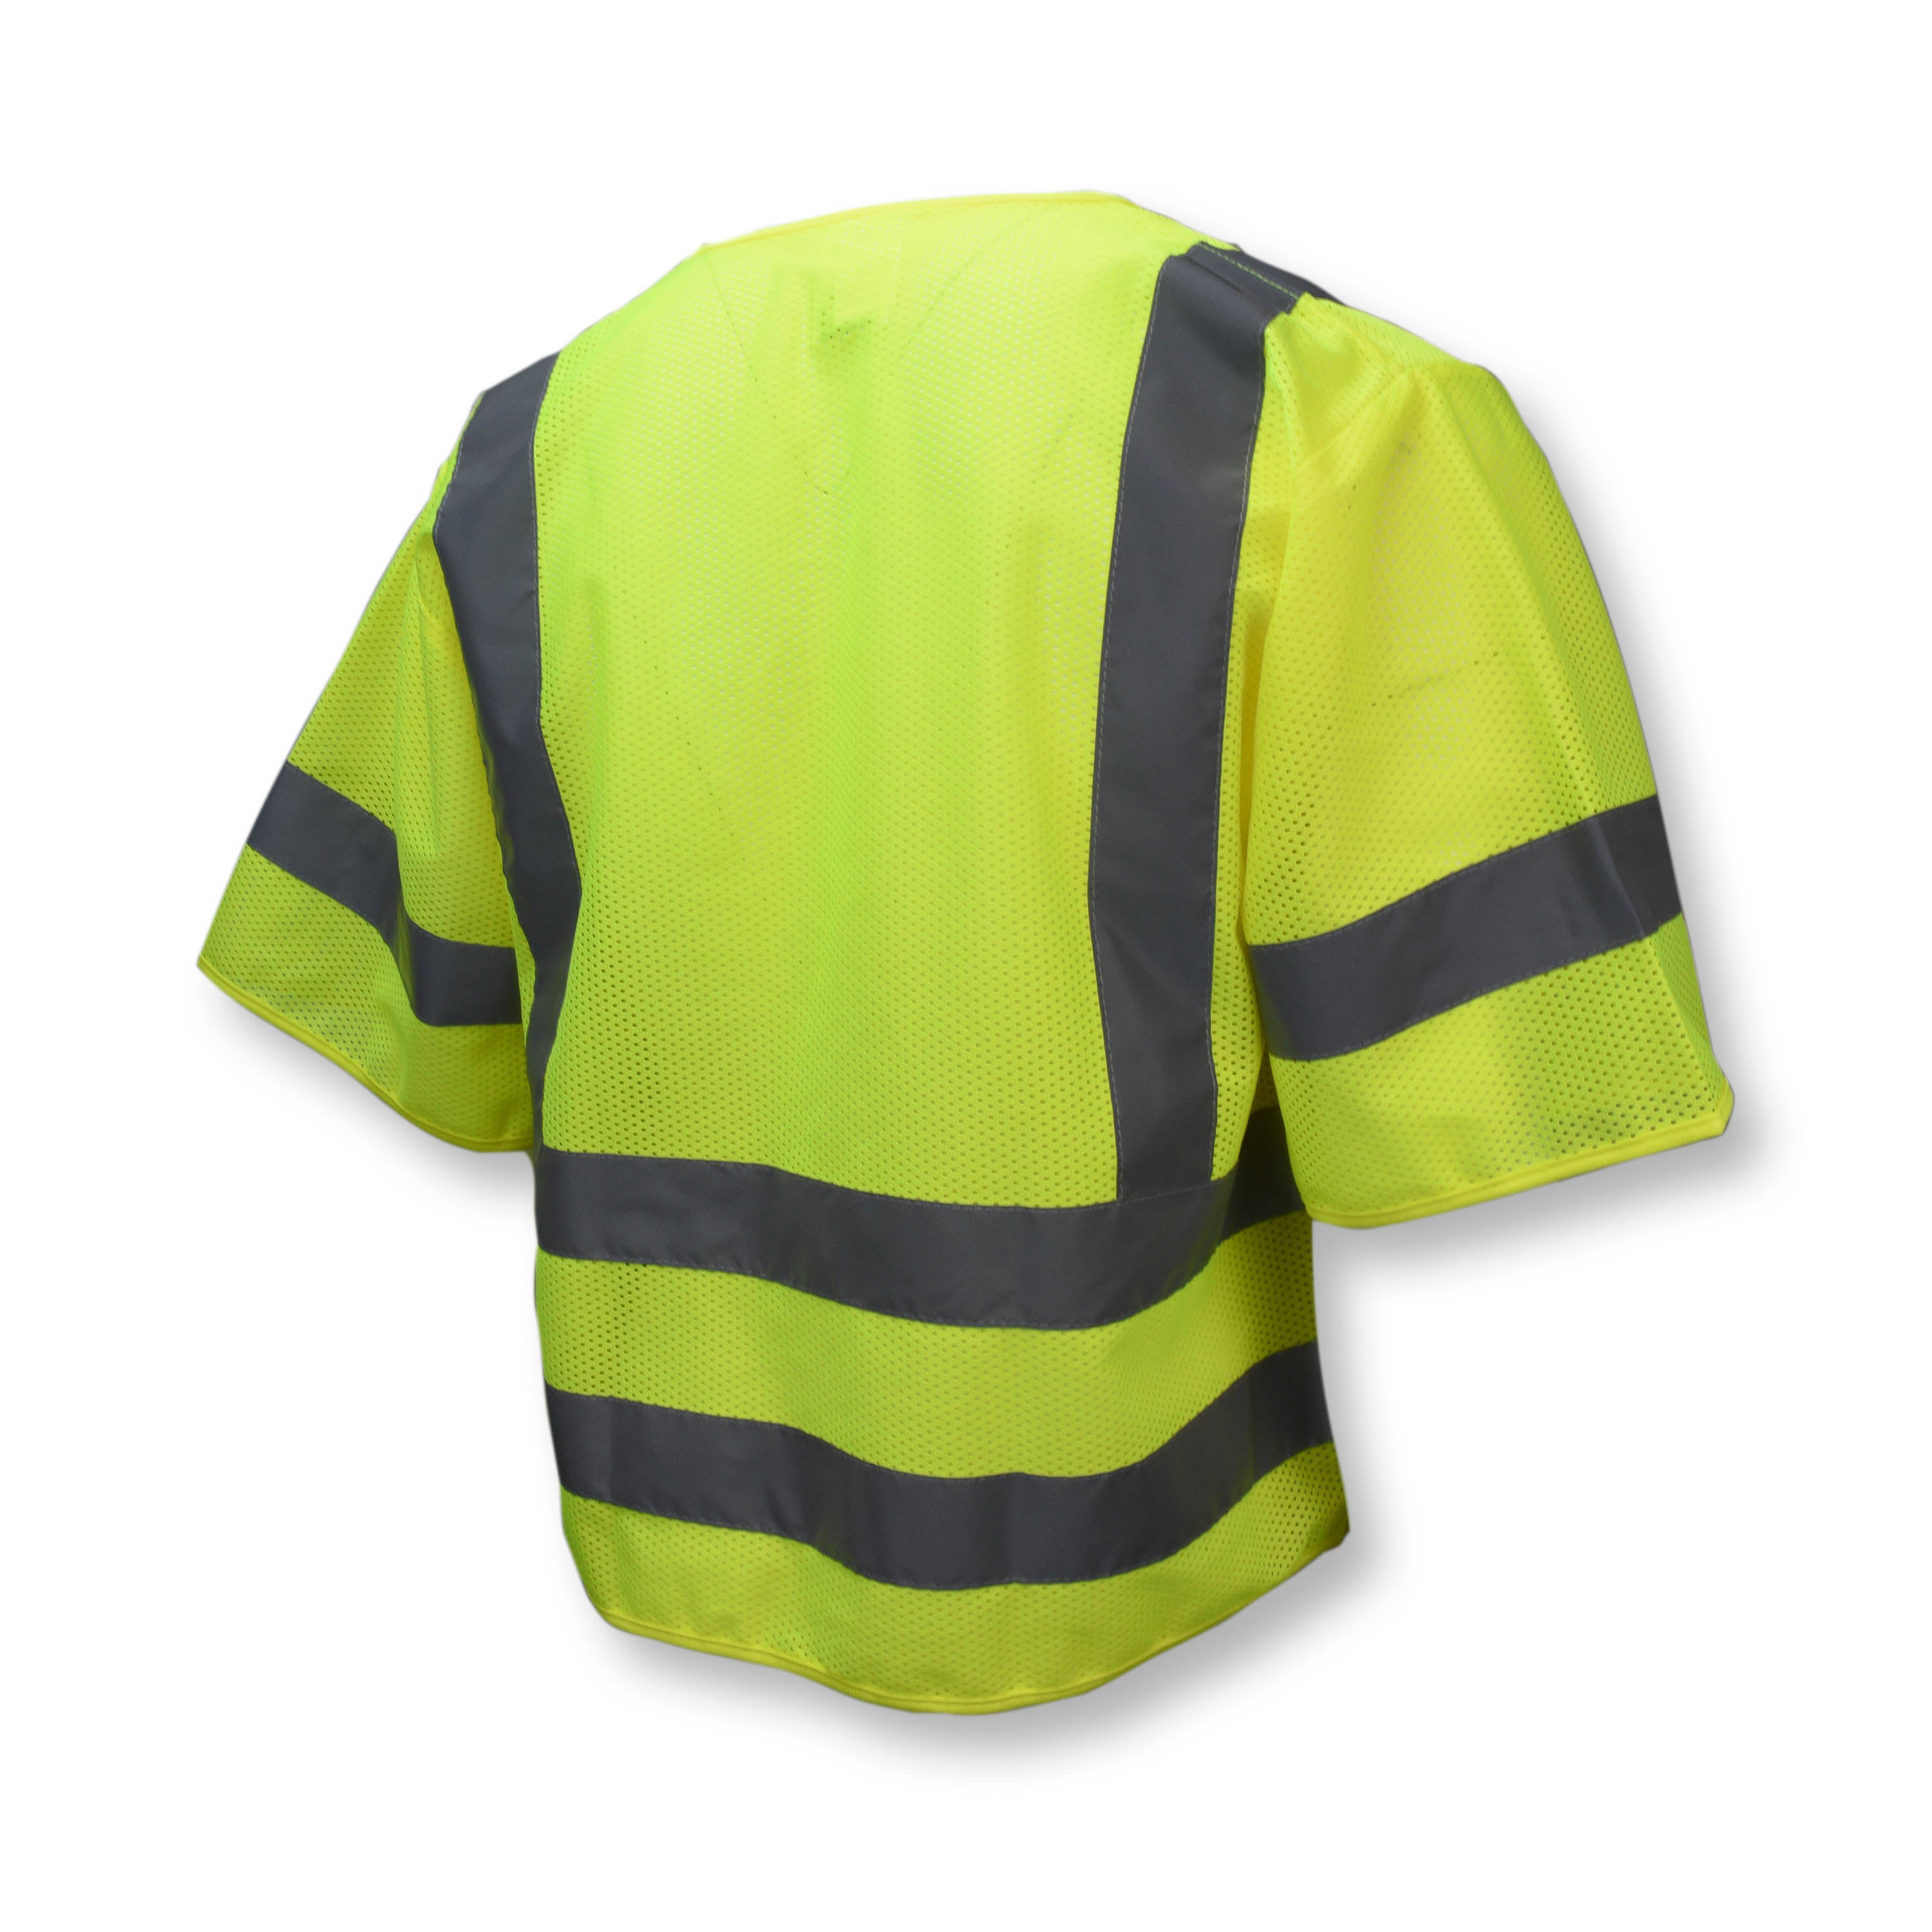 Radians SV83 Standard Type R Class 3 Mesh Safety Vest (Plus Sizes Only)